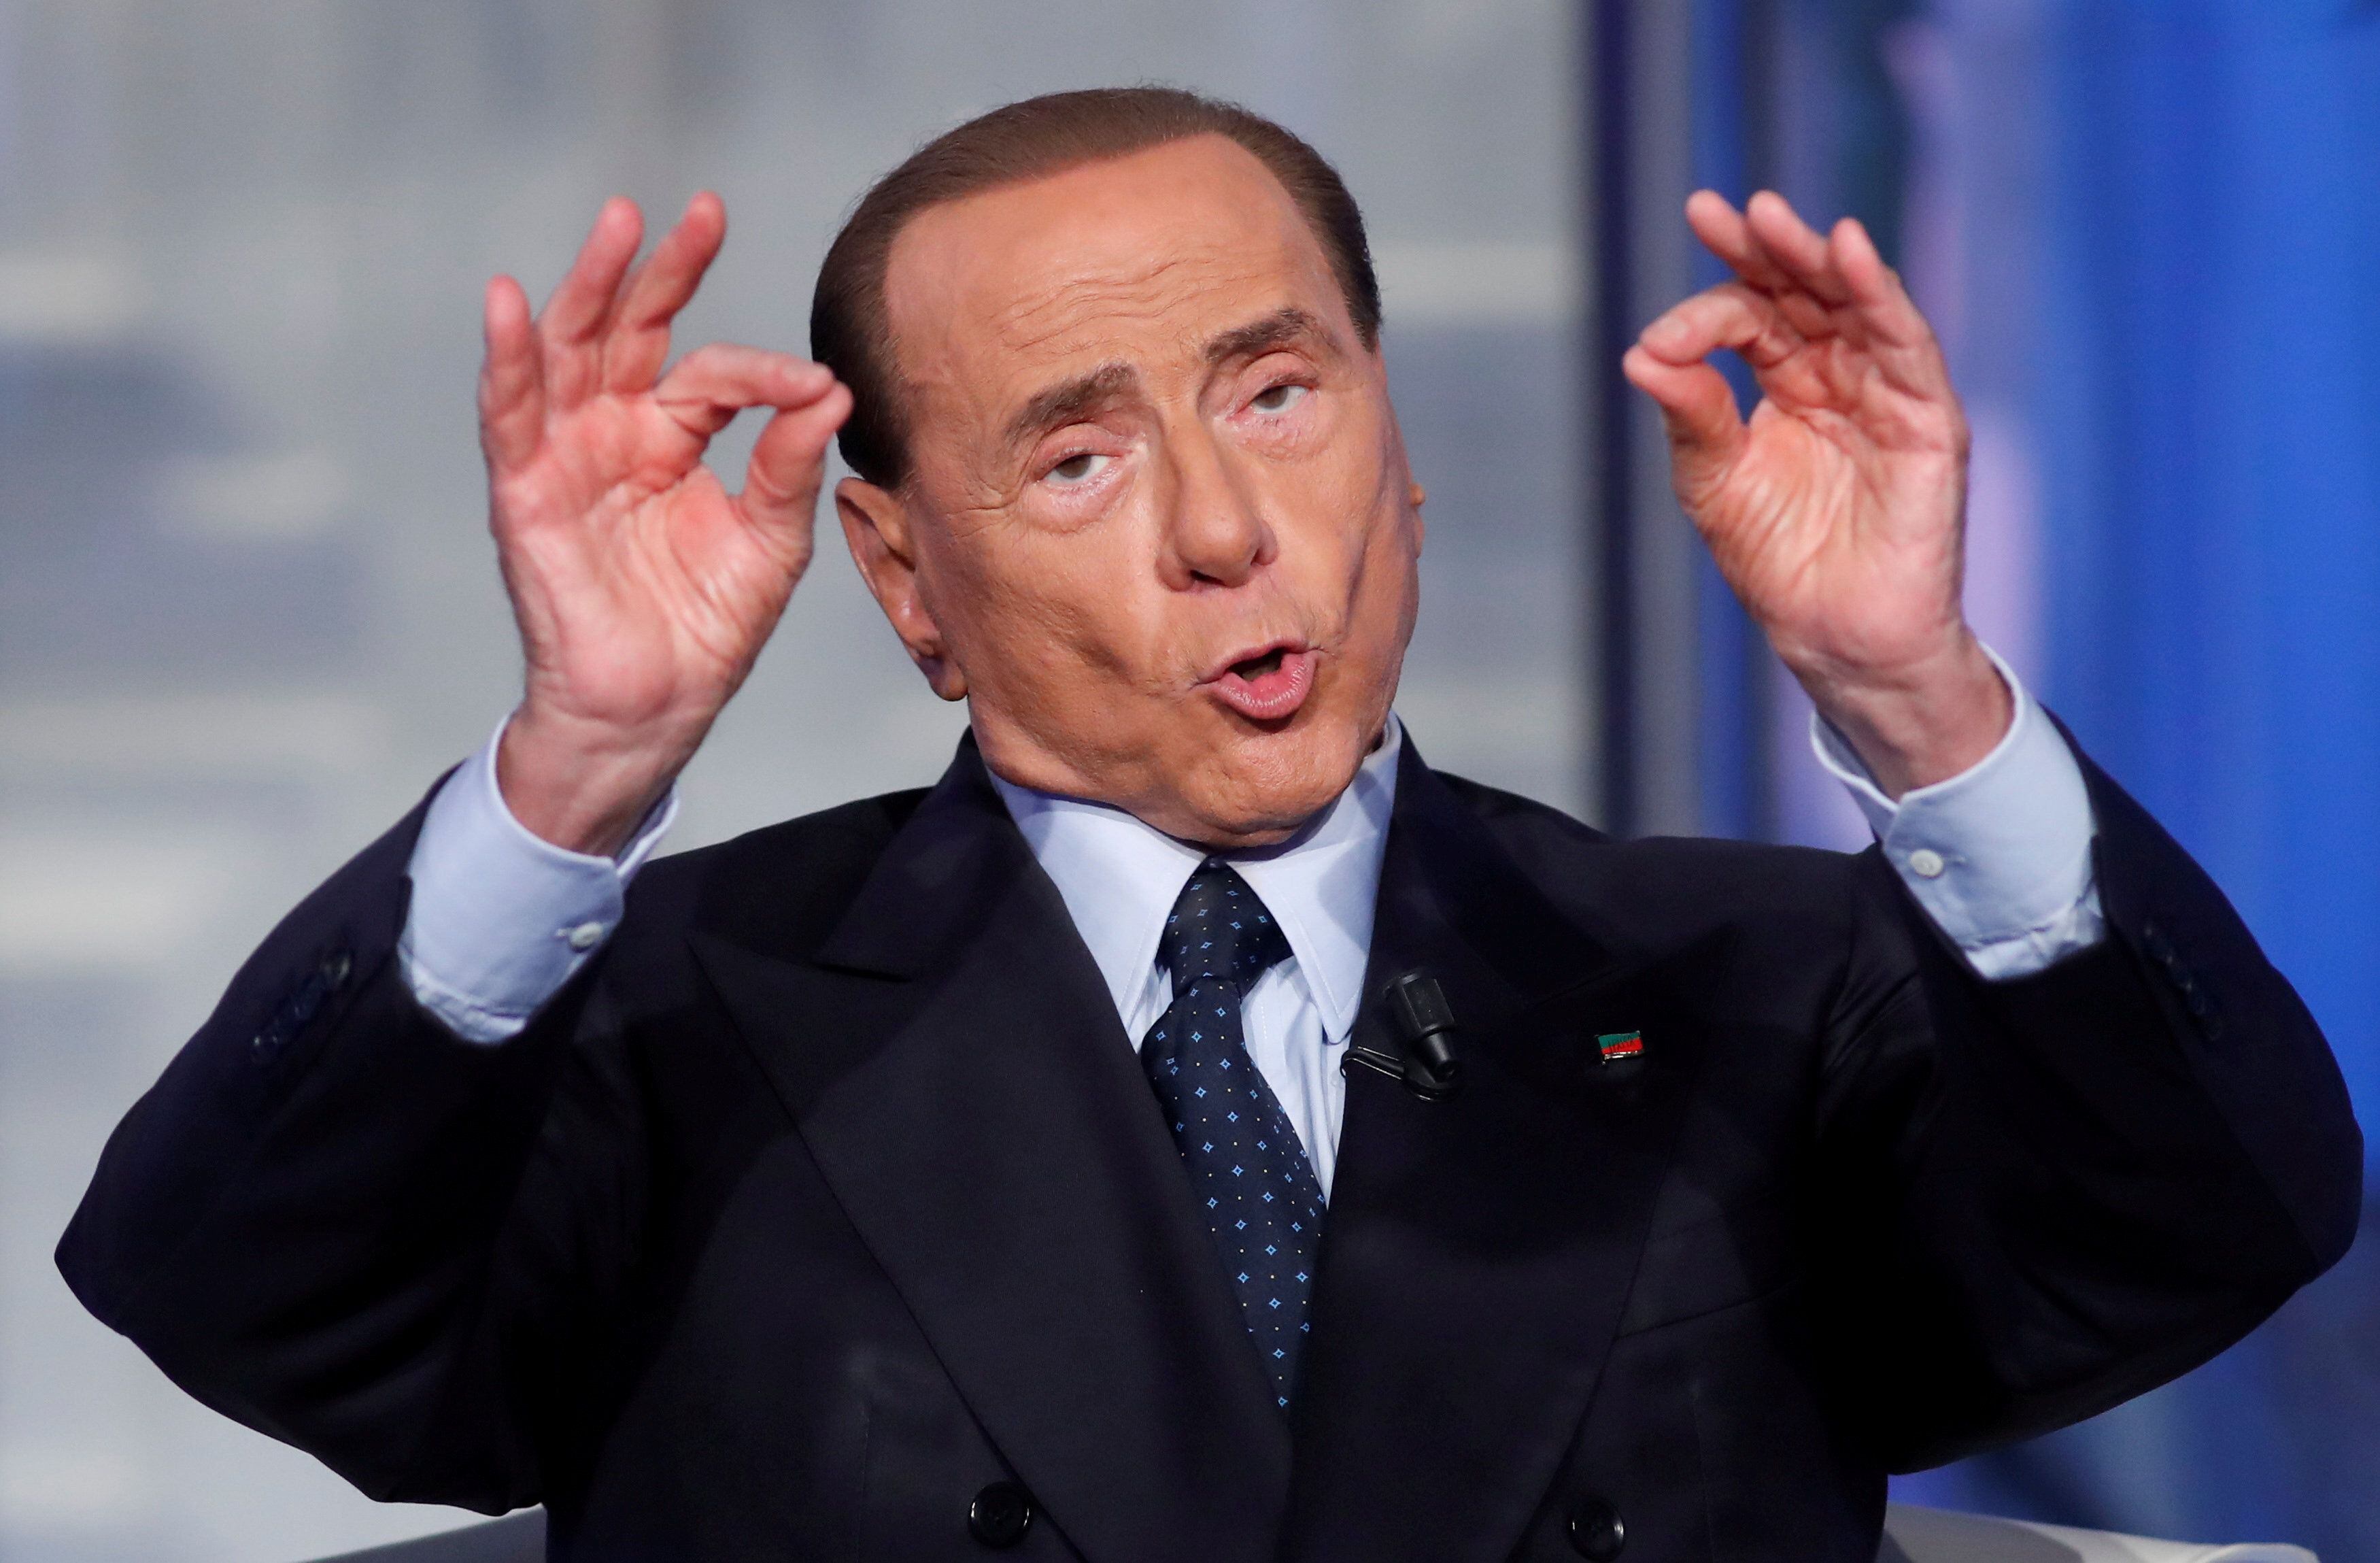 Silvio Berlusconi has been Prime Minister of Italy three times, the last between May 2008 and November 2011. REUTERS / Remo Casilli / File Photo